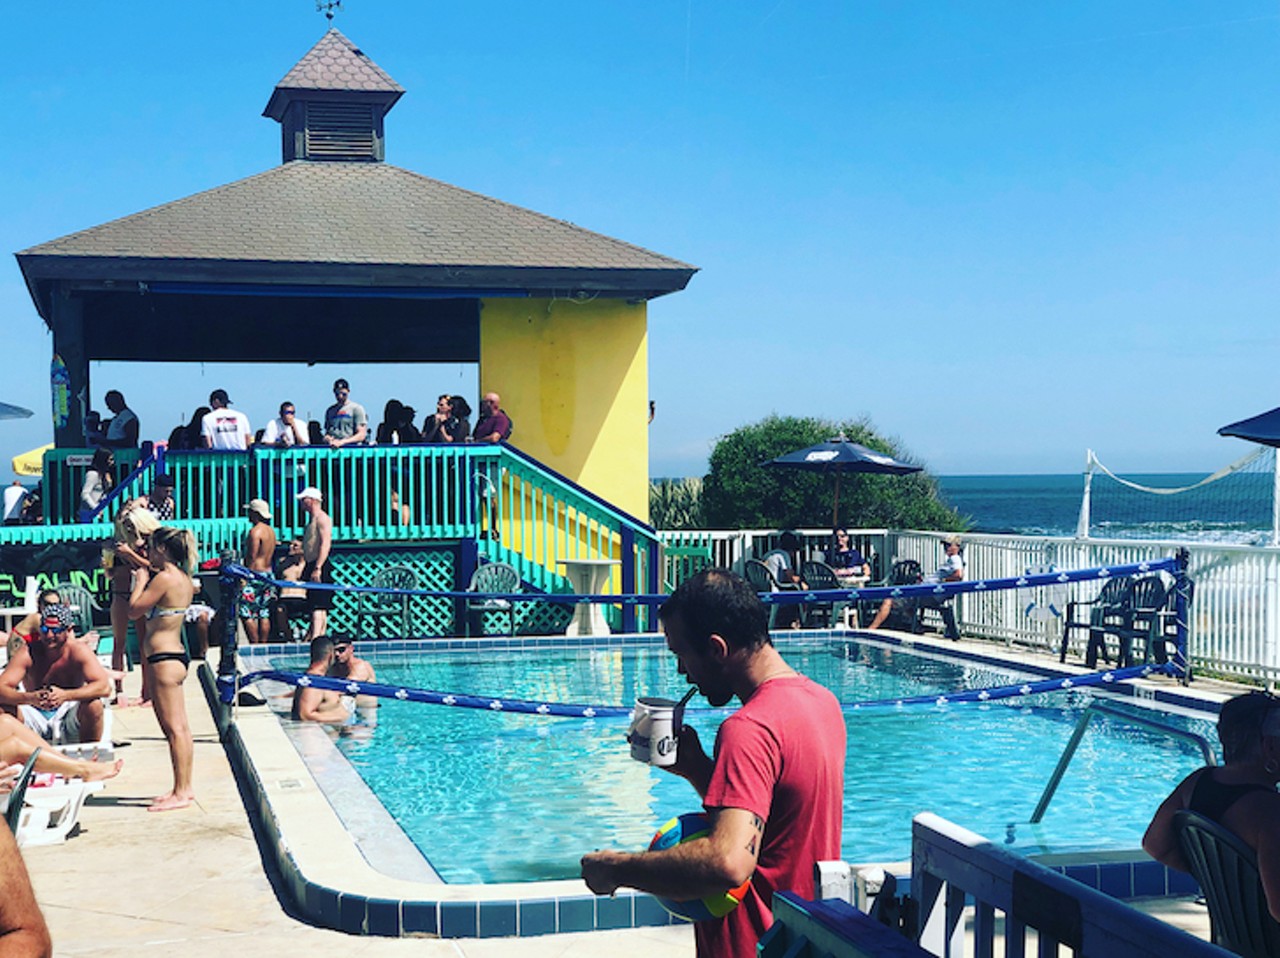 Chases on the Beach 
3401 S Atlantic Ave, New Smyrna Beach, FL 32169
(368) 423-8787
Experience the largest beach bar in New Smyrna Beach with an oceanfront view. There&#146;s a pool&#151;only available to patrons 21+&#151;and Happy Hour is Monday through Friday from 3 p.m. to 6 p.m. Chase&#146;s on the Beach serves seafood and burgers, but they will soon be offering pizza on their menu.
Photo via justininfurna/Instagram